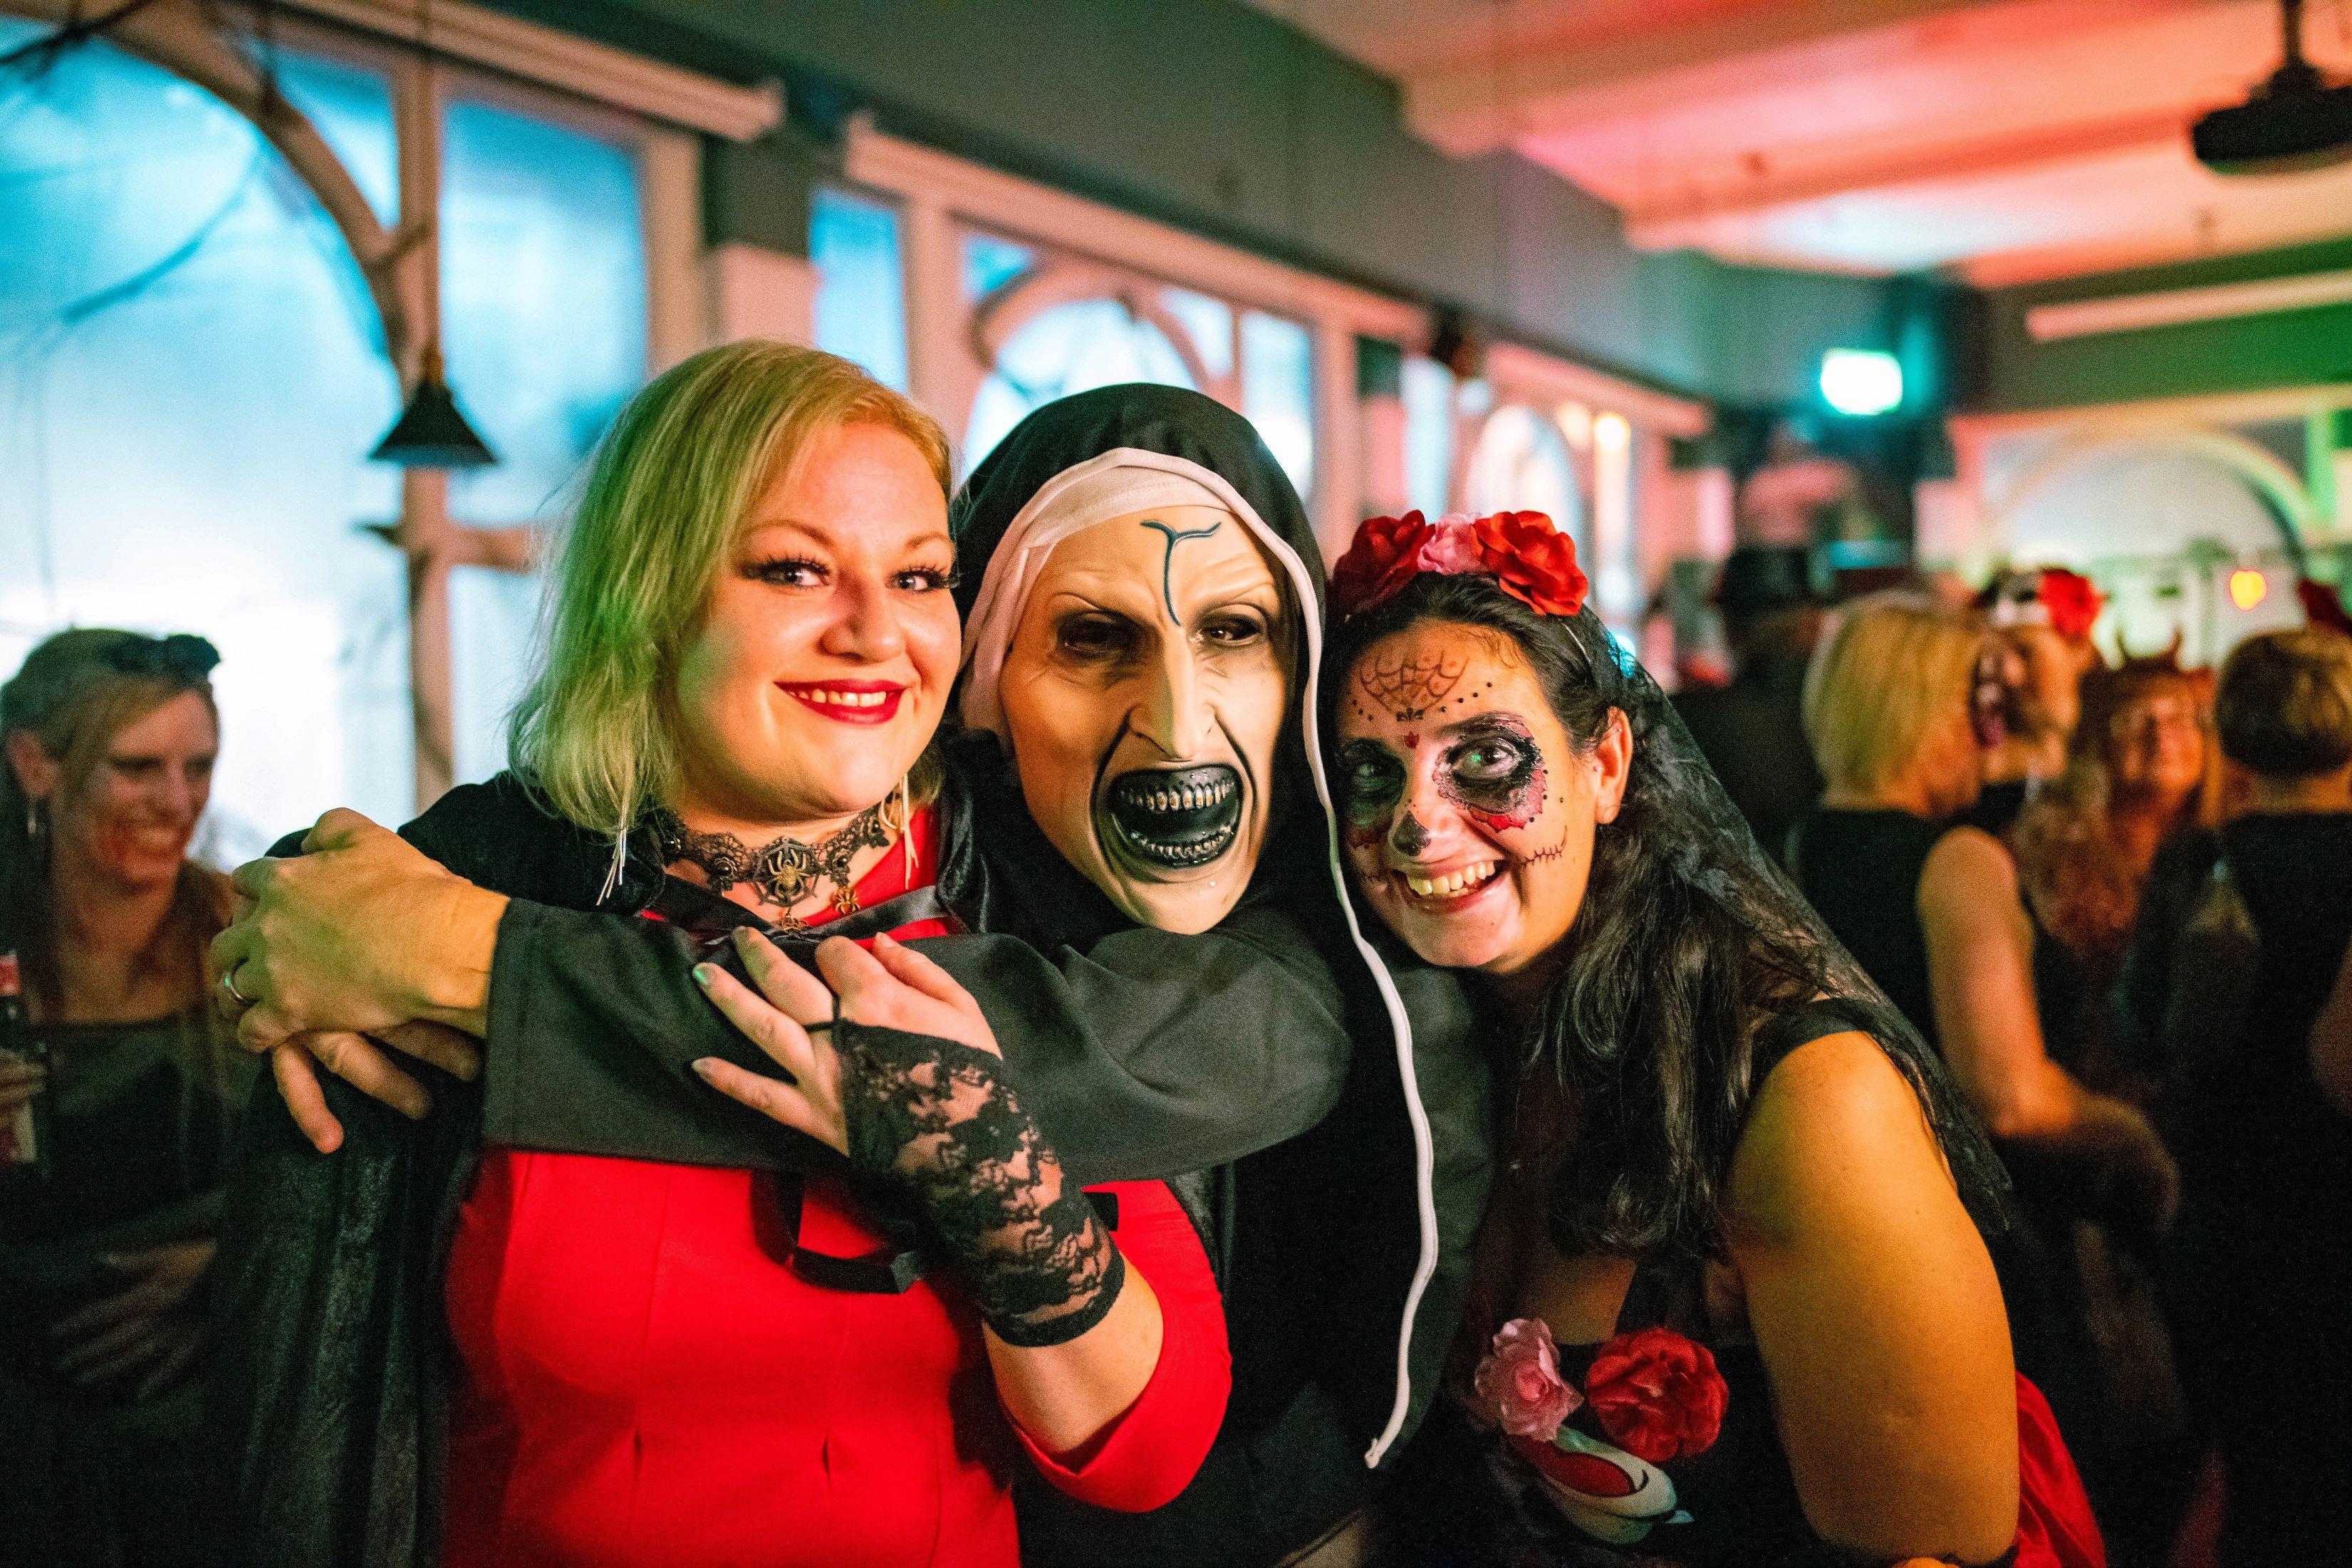 A great night was had by all at the Murdoch’s Crazy Eyes Hallowe'en show. Pictures: Guild Care